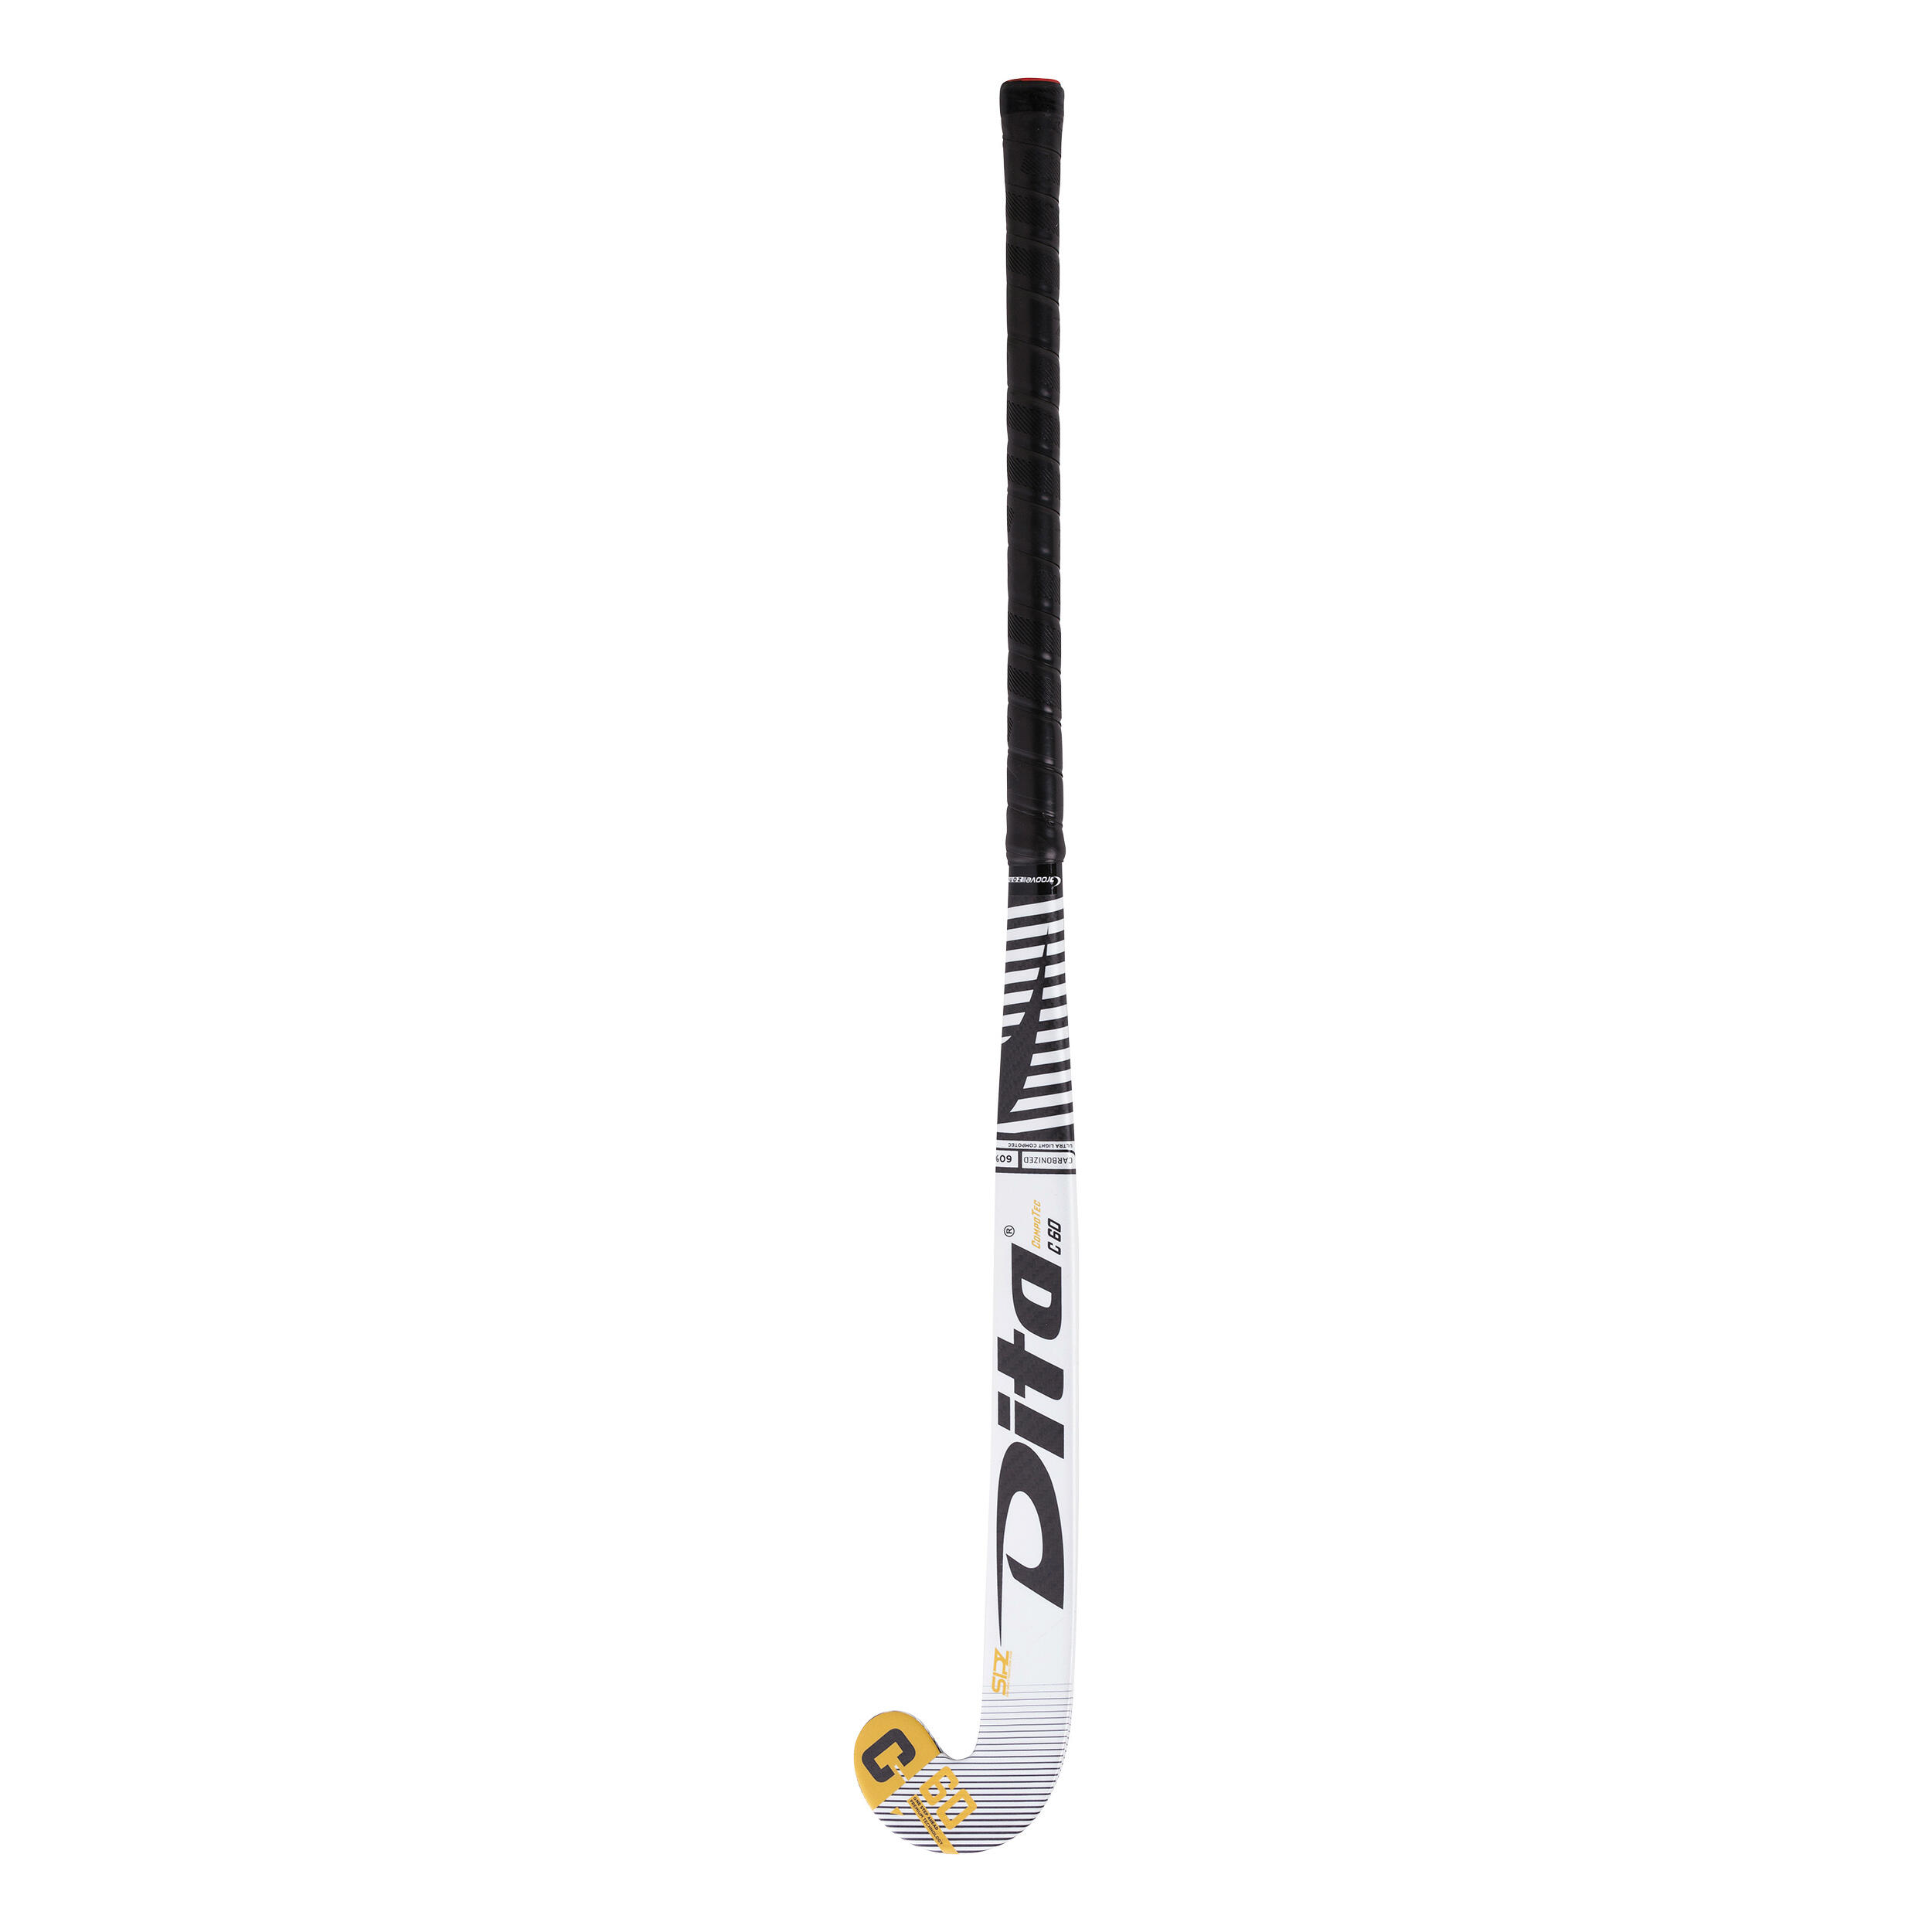 Adult Field Hockey Advanced 60% Carbon X-Low Bow Stick CompotecC60 - White/Black 5/12